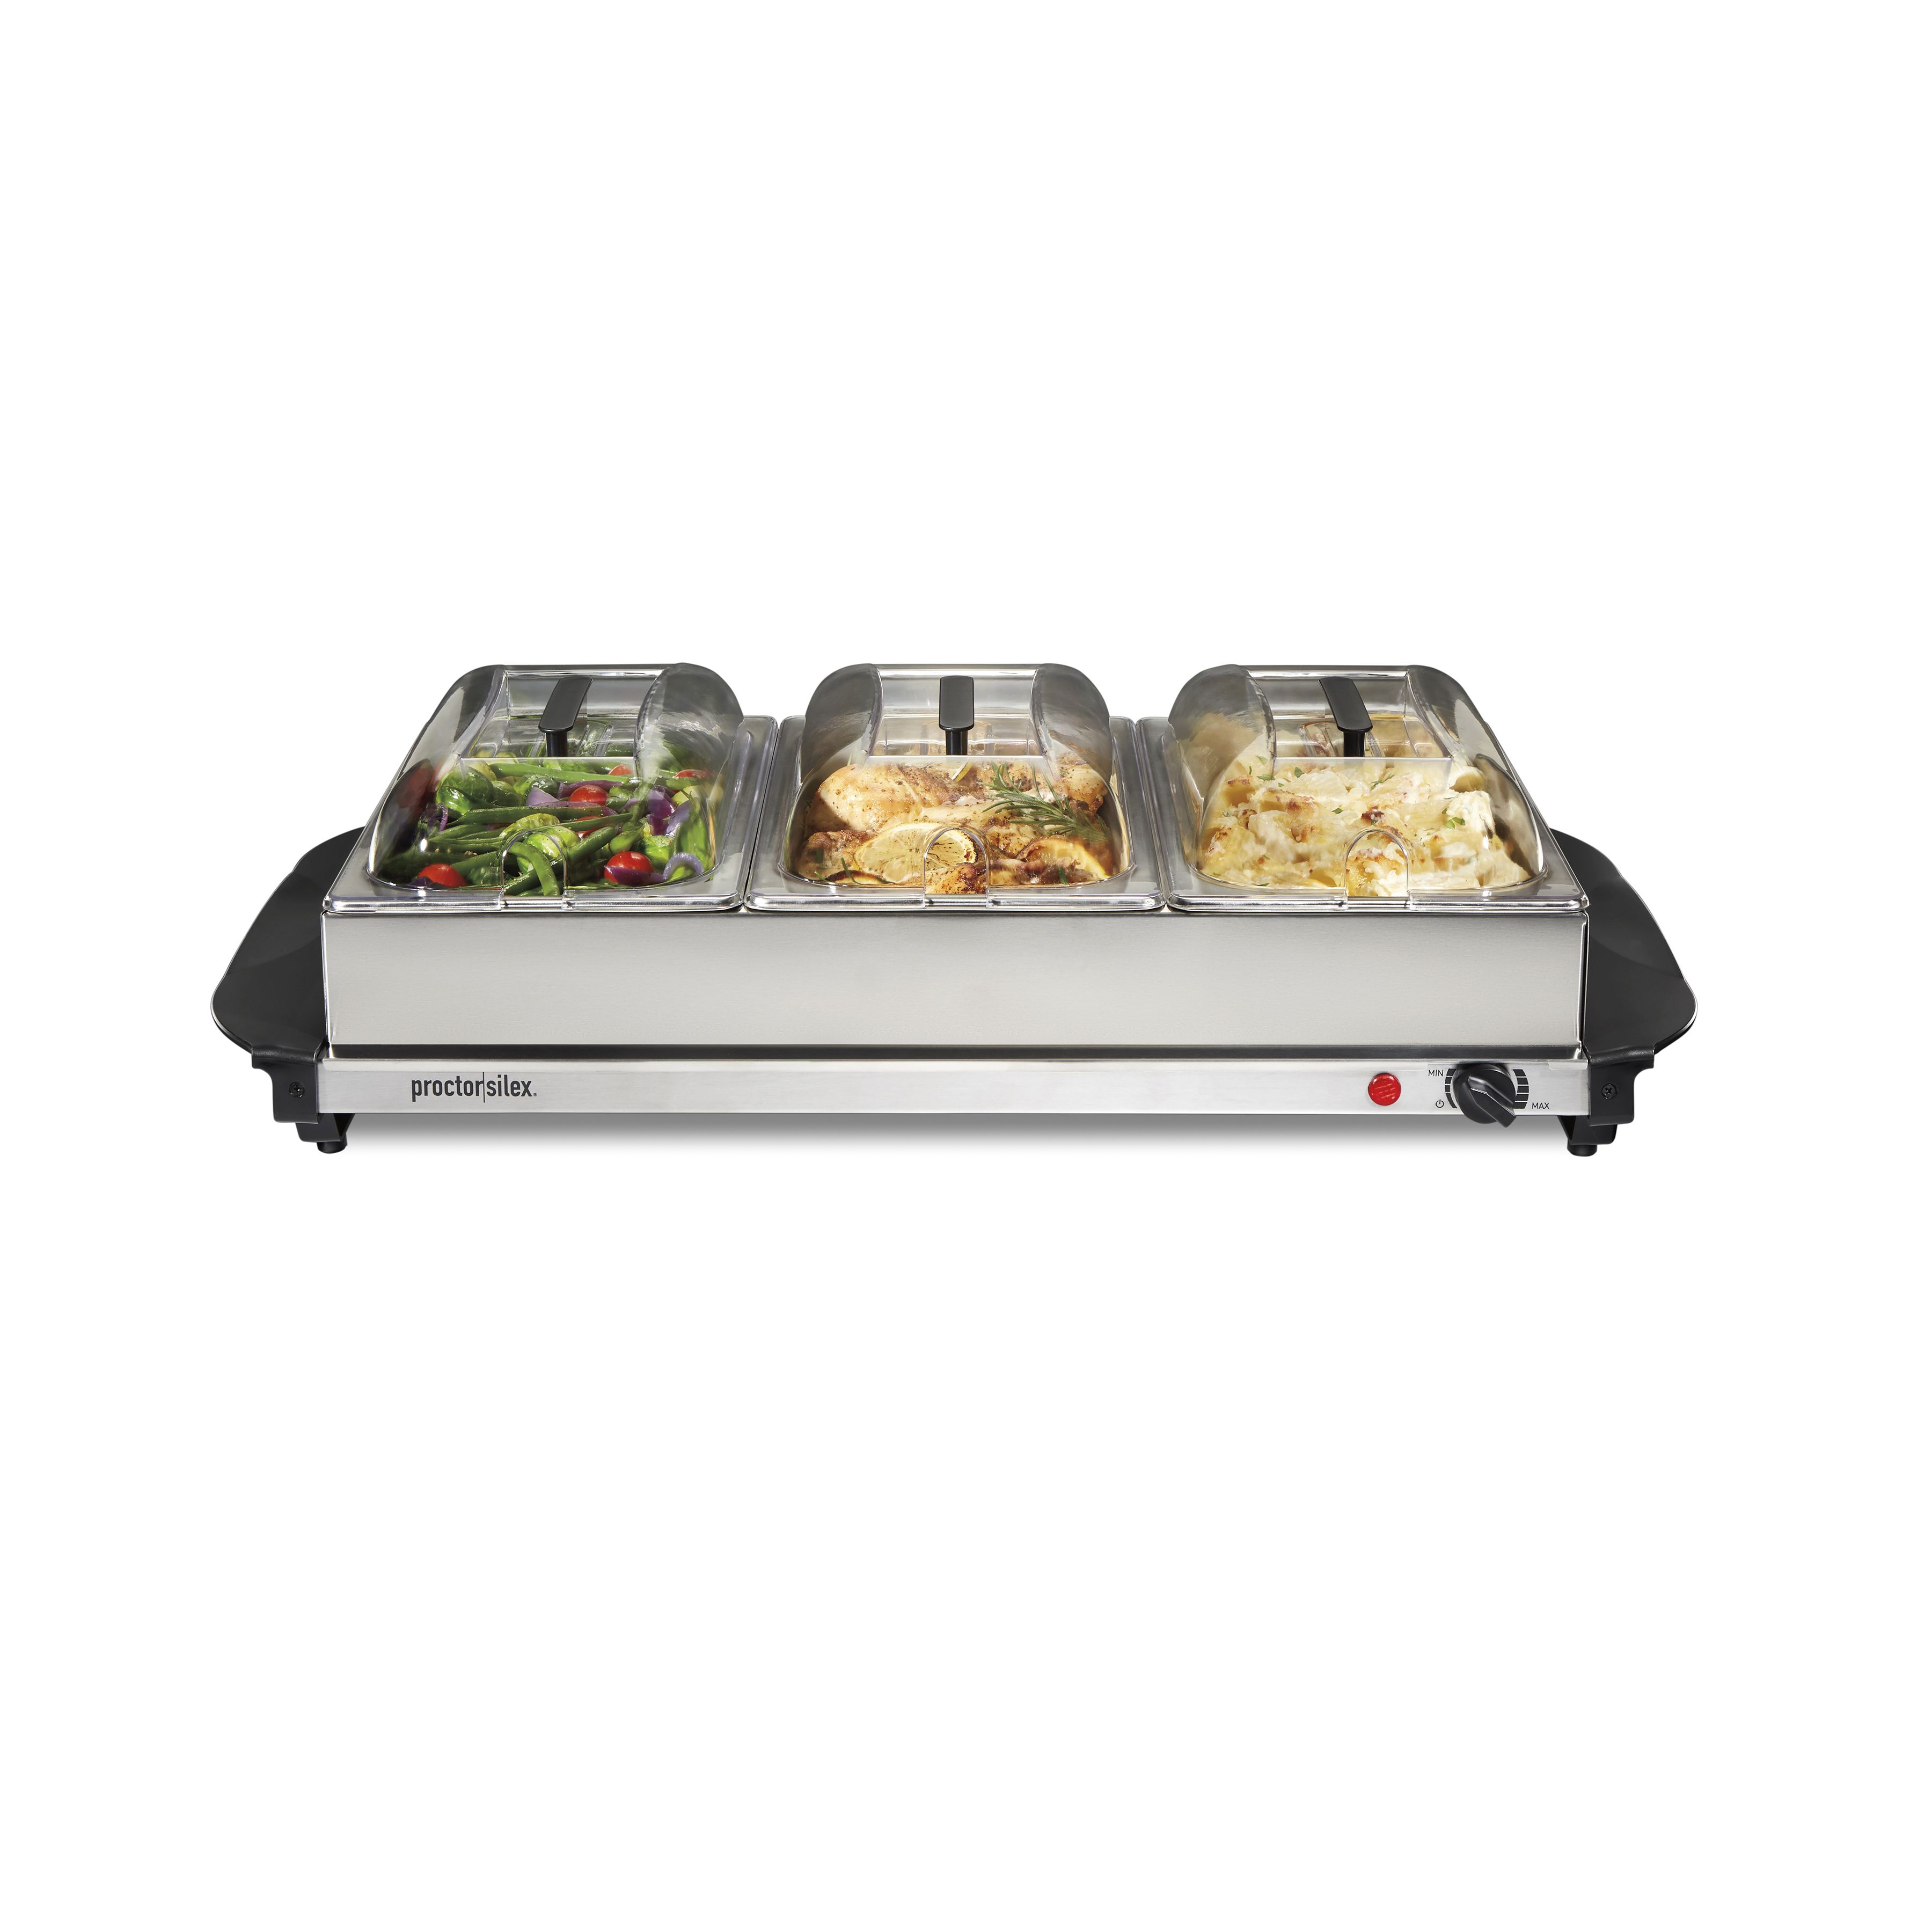 Chefman Stainless Steel Electric Buffet Server & Warming Tray, 14